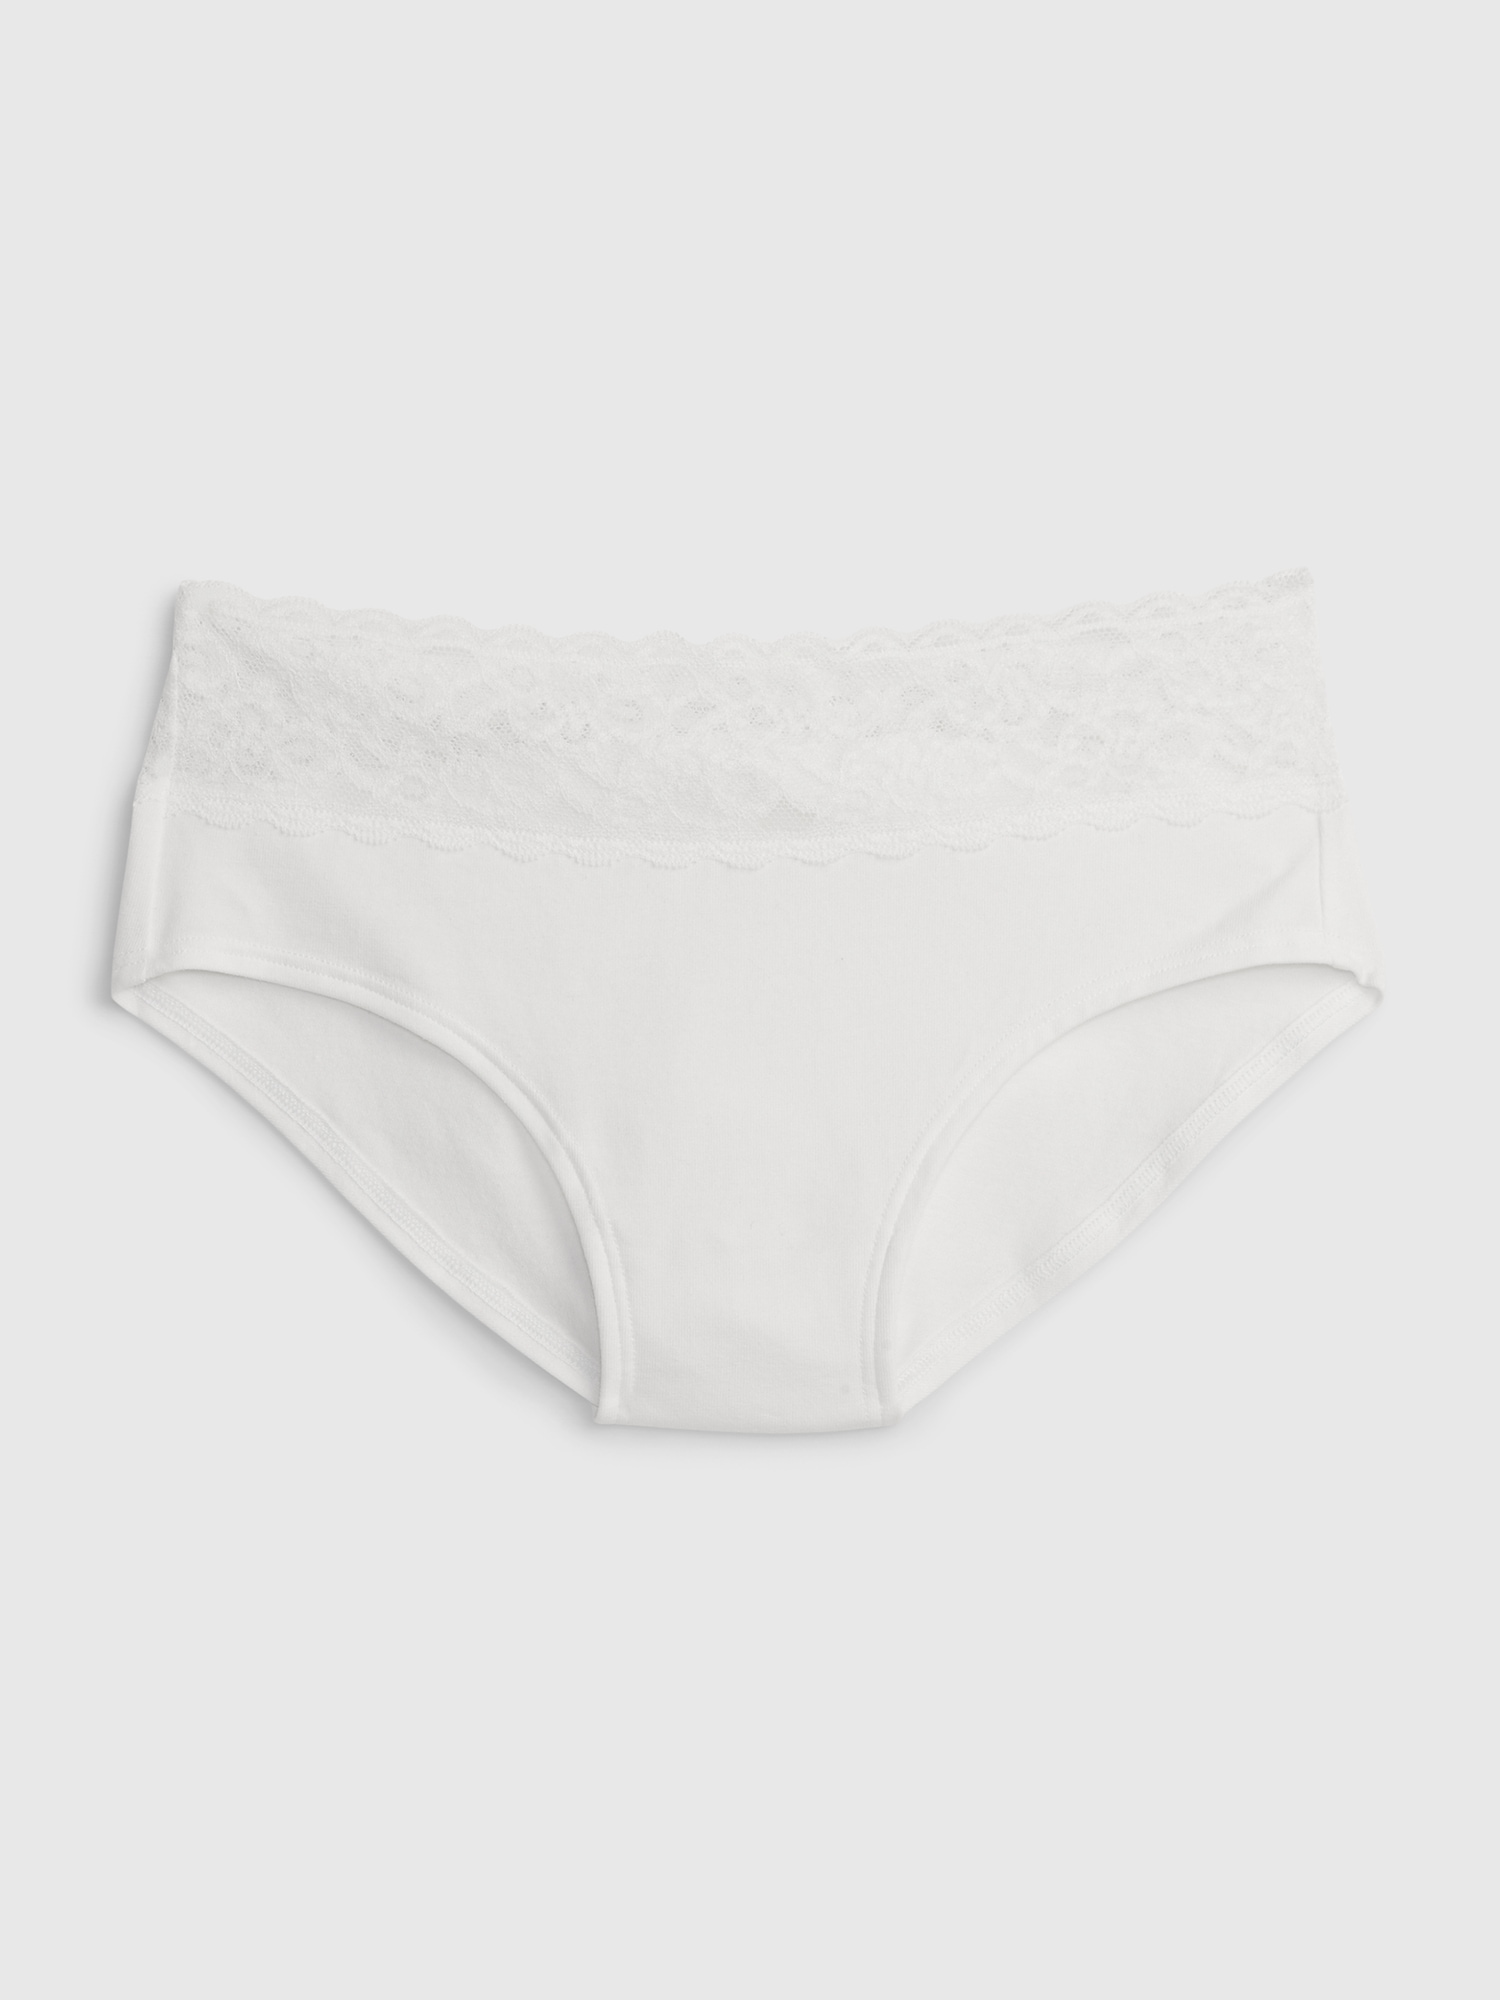 Gap Lace-Trim Hipster white. 1